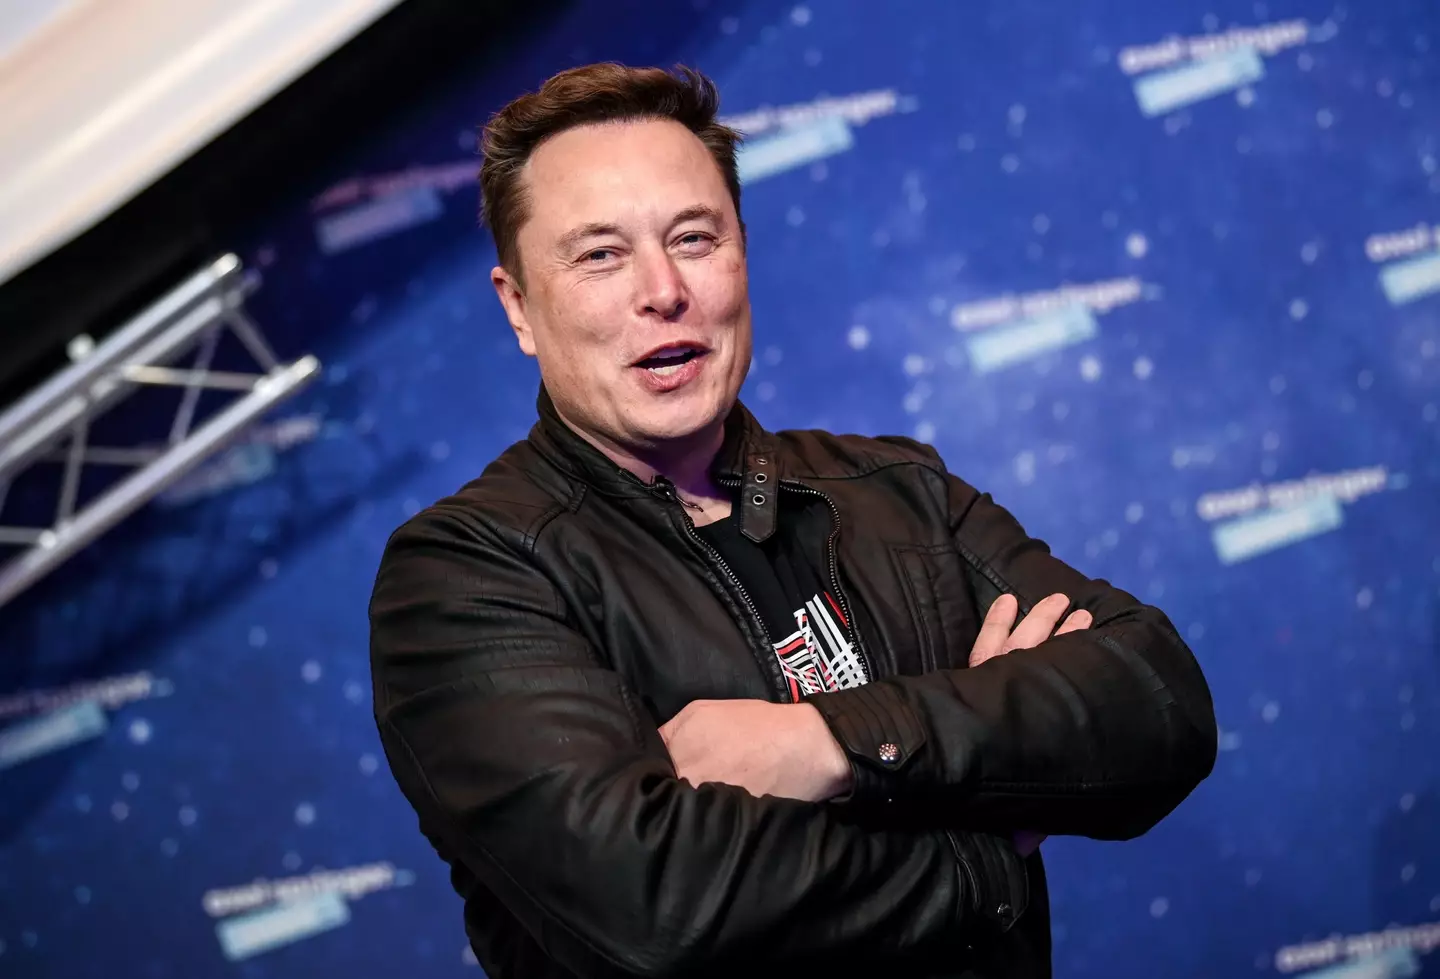 Elon Musk is thought to have set up a fund which donated to the ACLU.